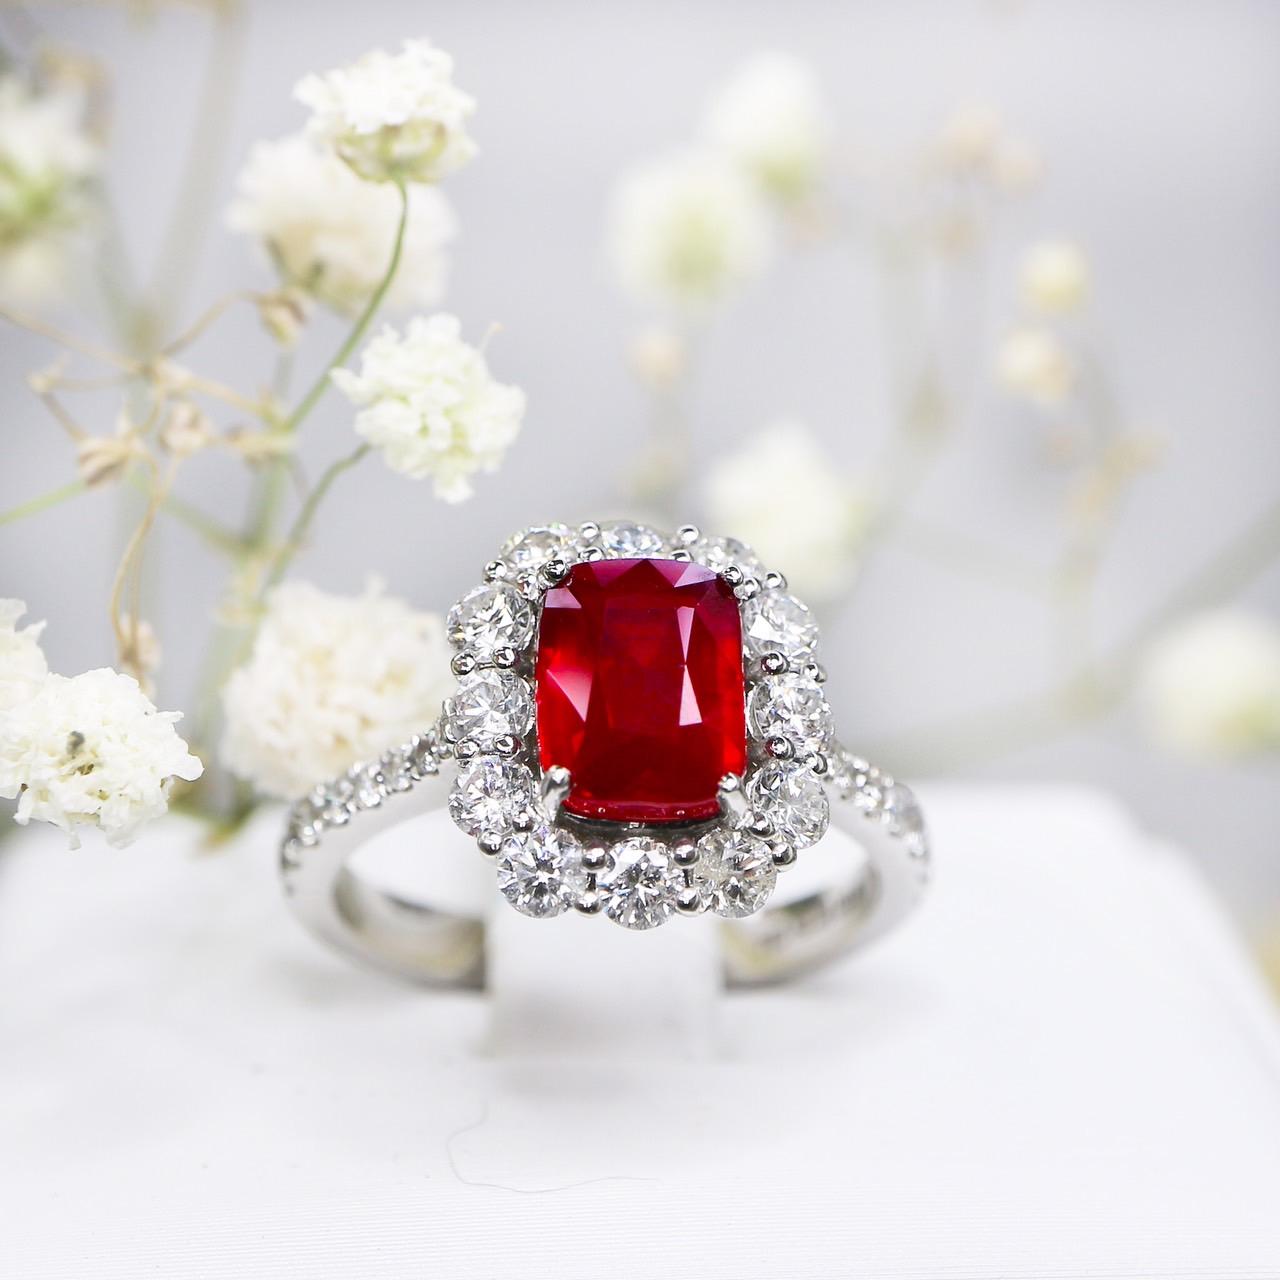 *GRS 18K 2.06 ct Pigeon Blood Ruby&Diamonds Antique Art Deco Engagement Ring*
GRS-Certified natural pigeon blood ruby as the center stone weighing 2.06 ct set on the 18K white gold halo design pave' band with natural FG VS diamonds weighing 0.95 ct.